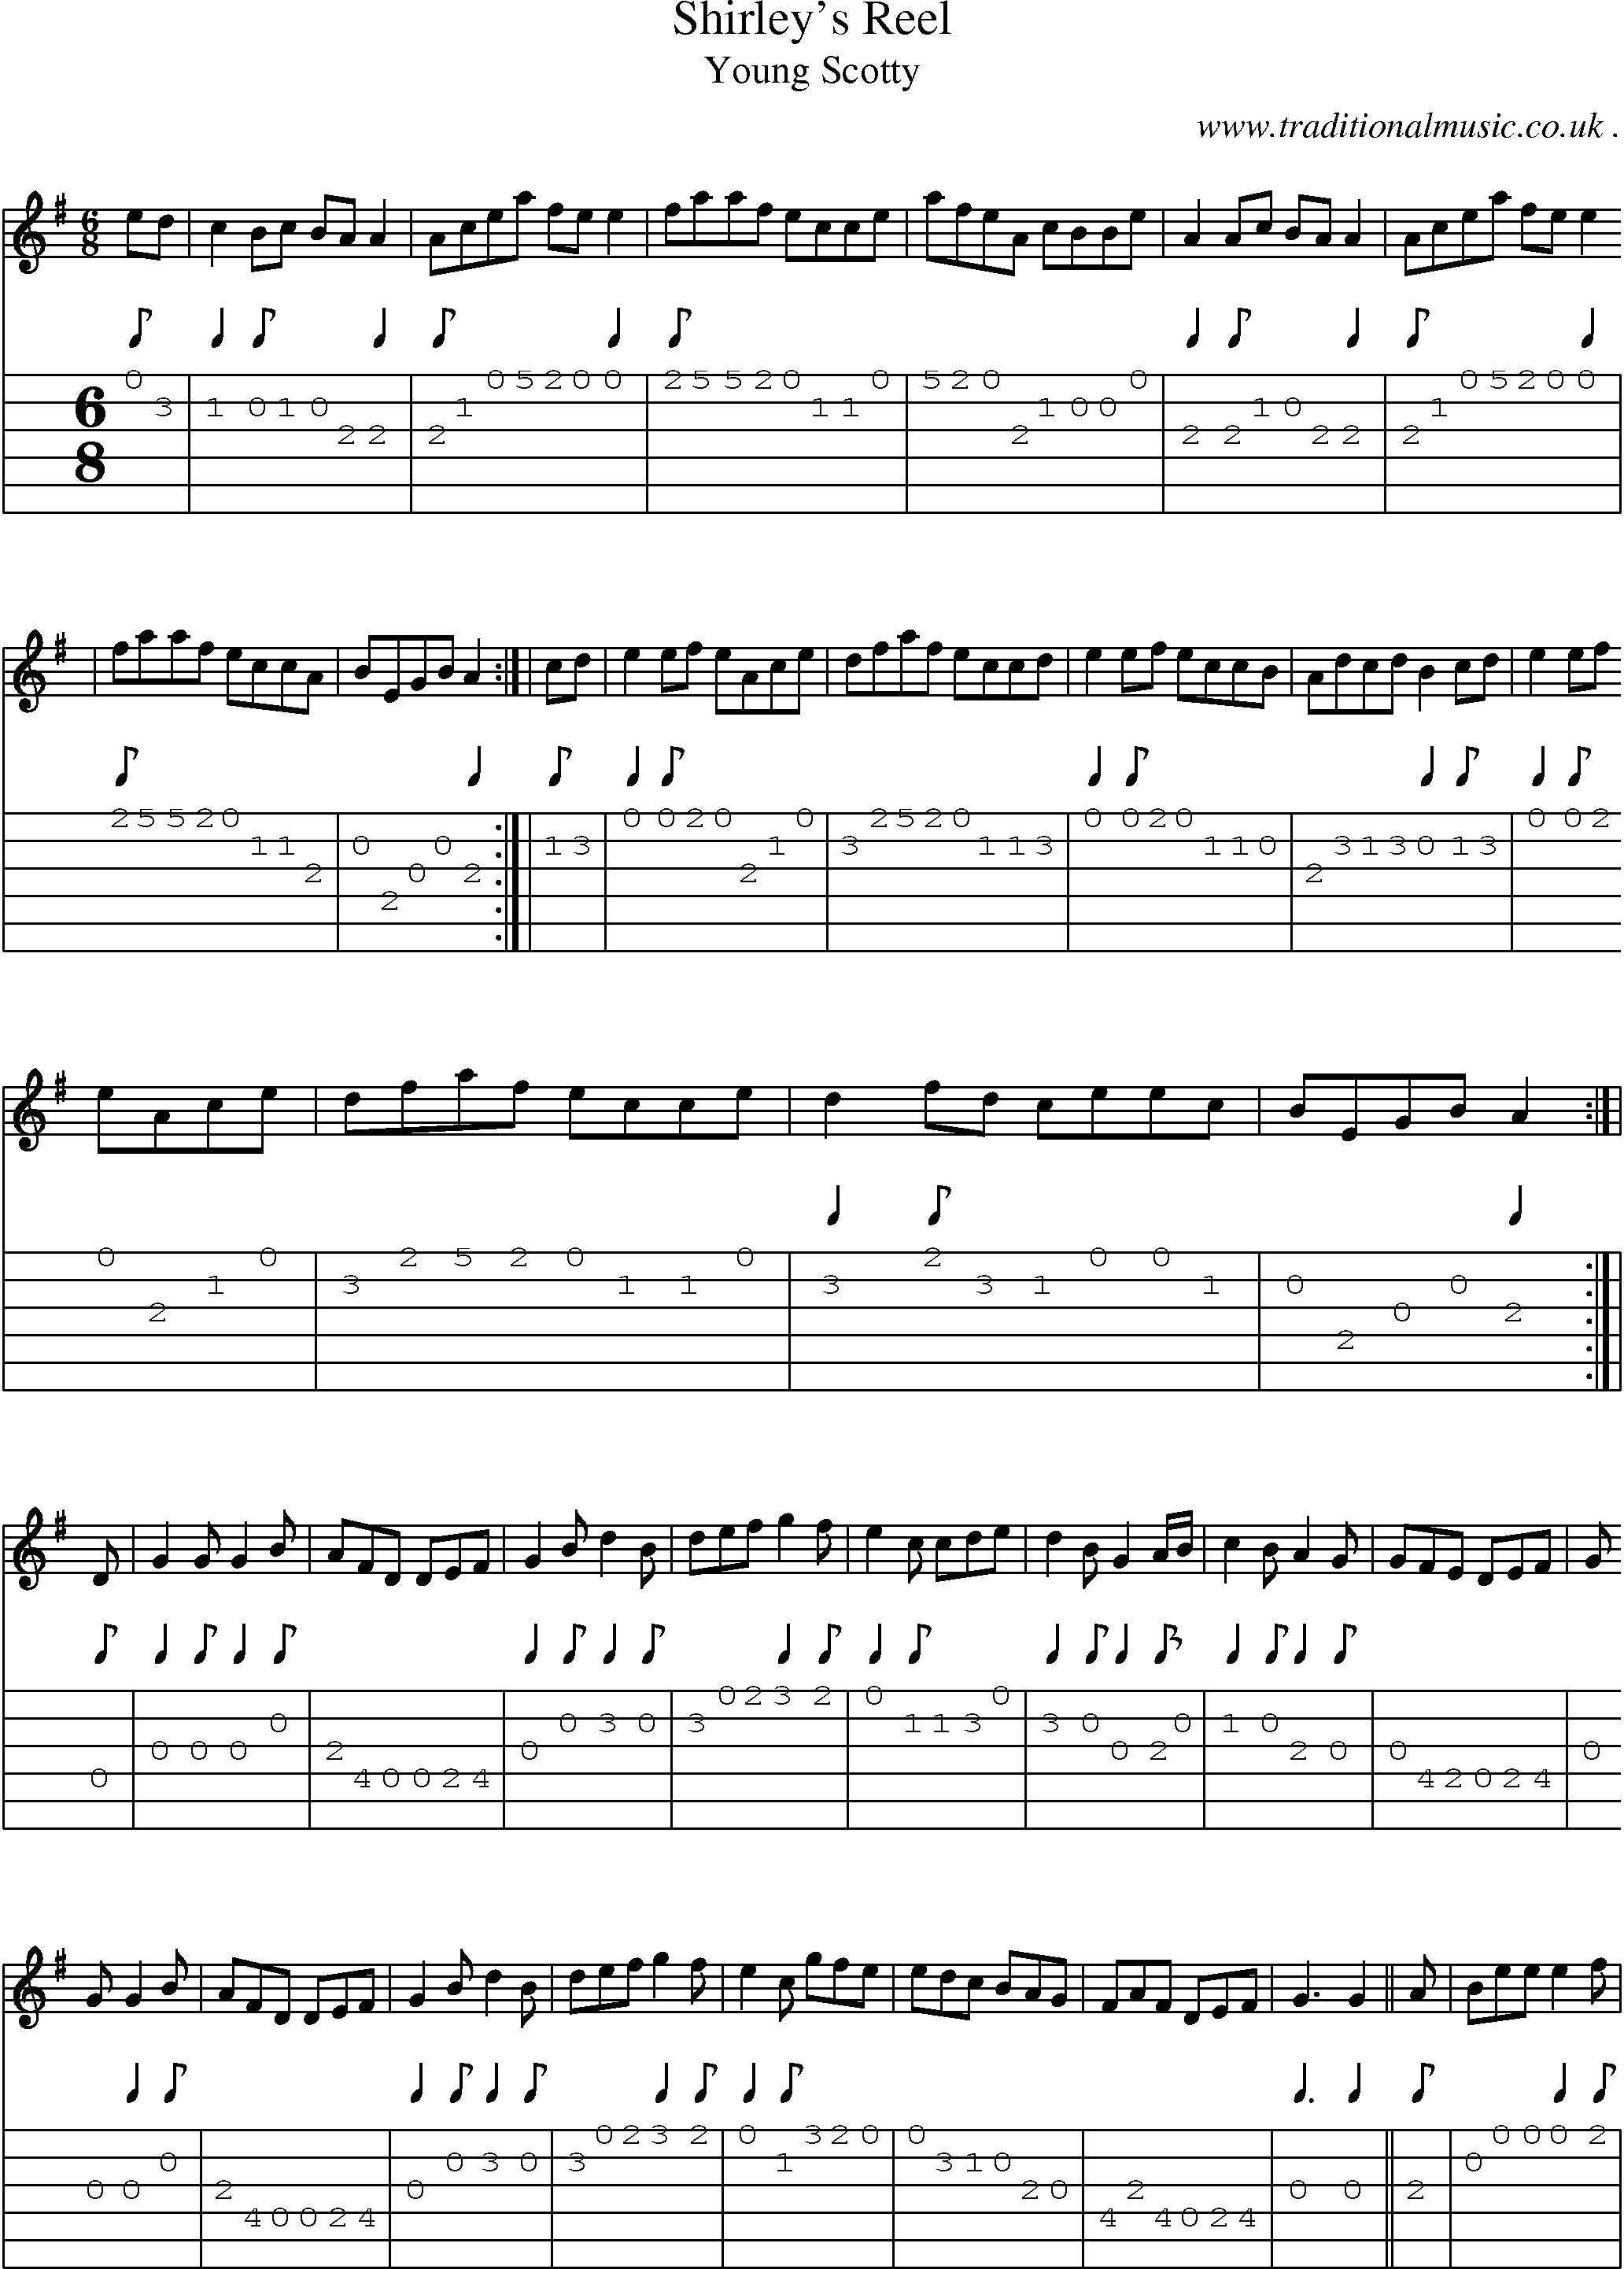 Sheet-Music and Guitar Tabs for Shirleys Reel